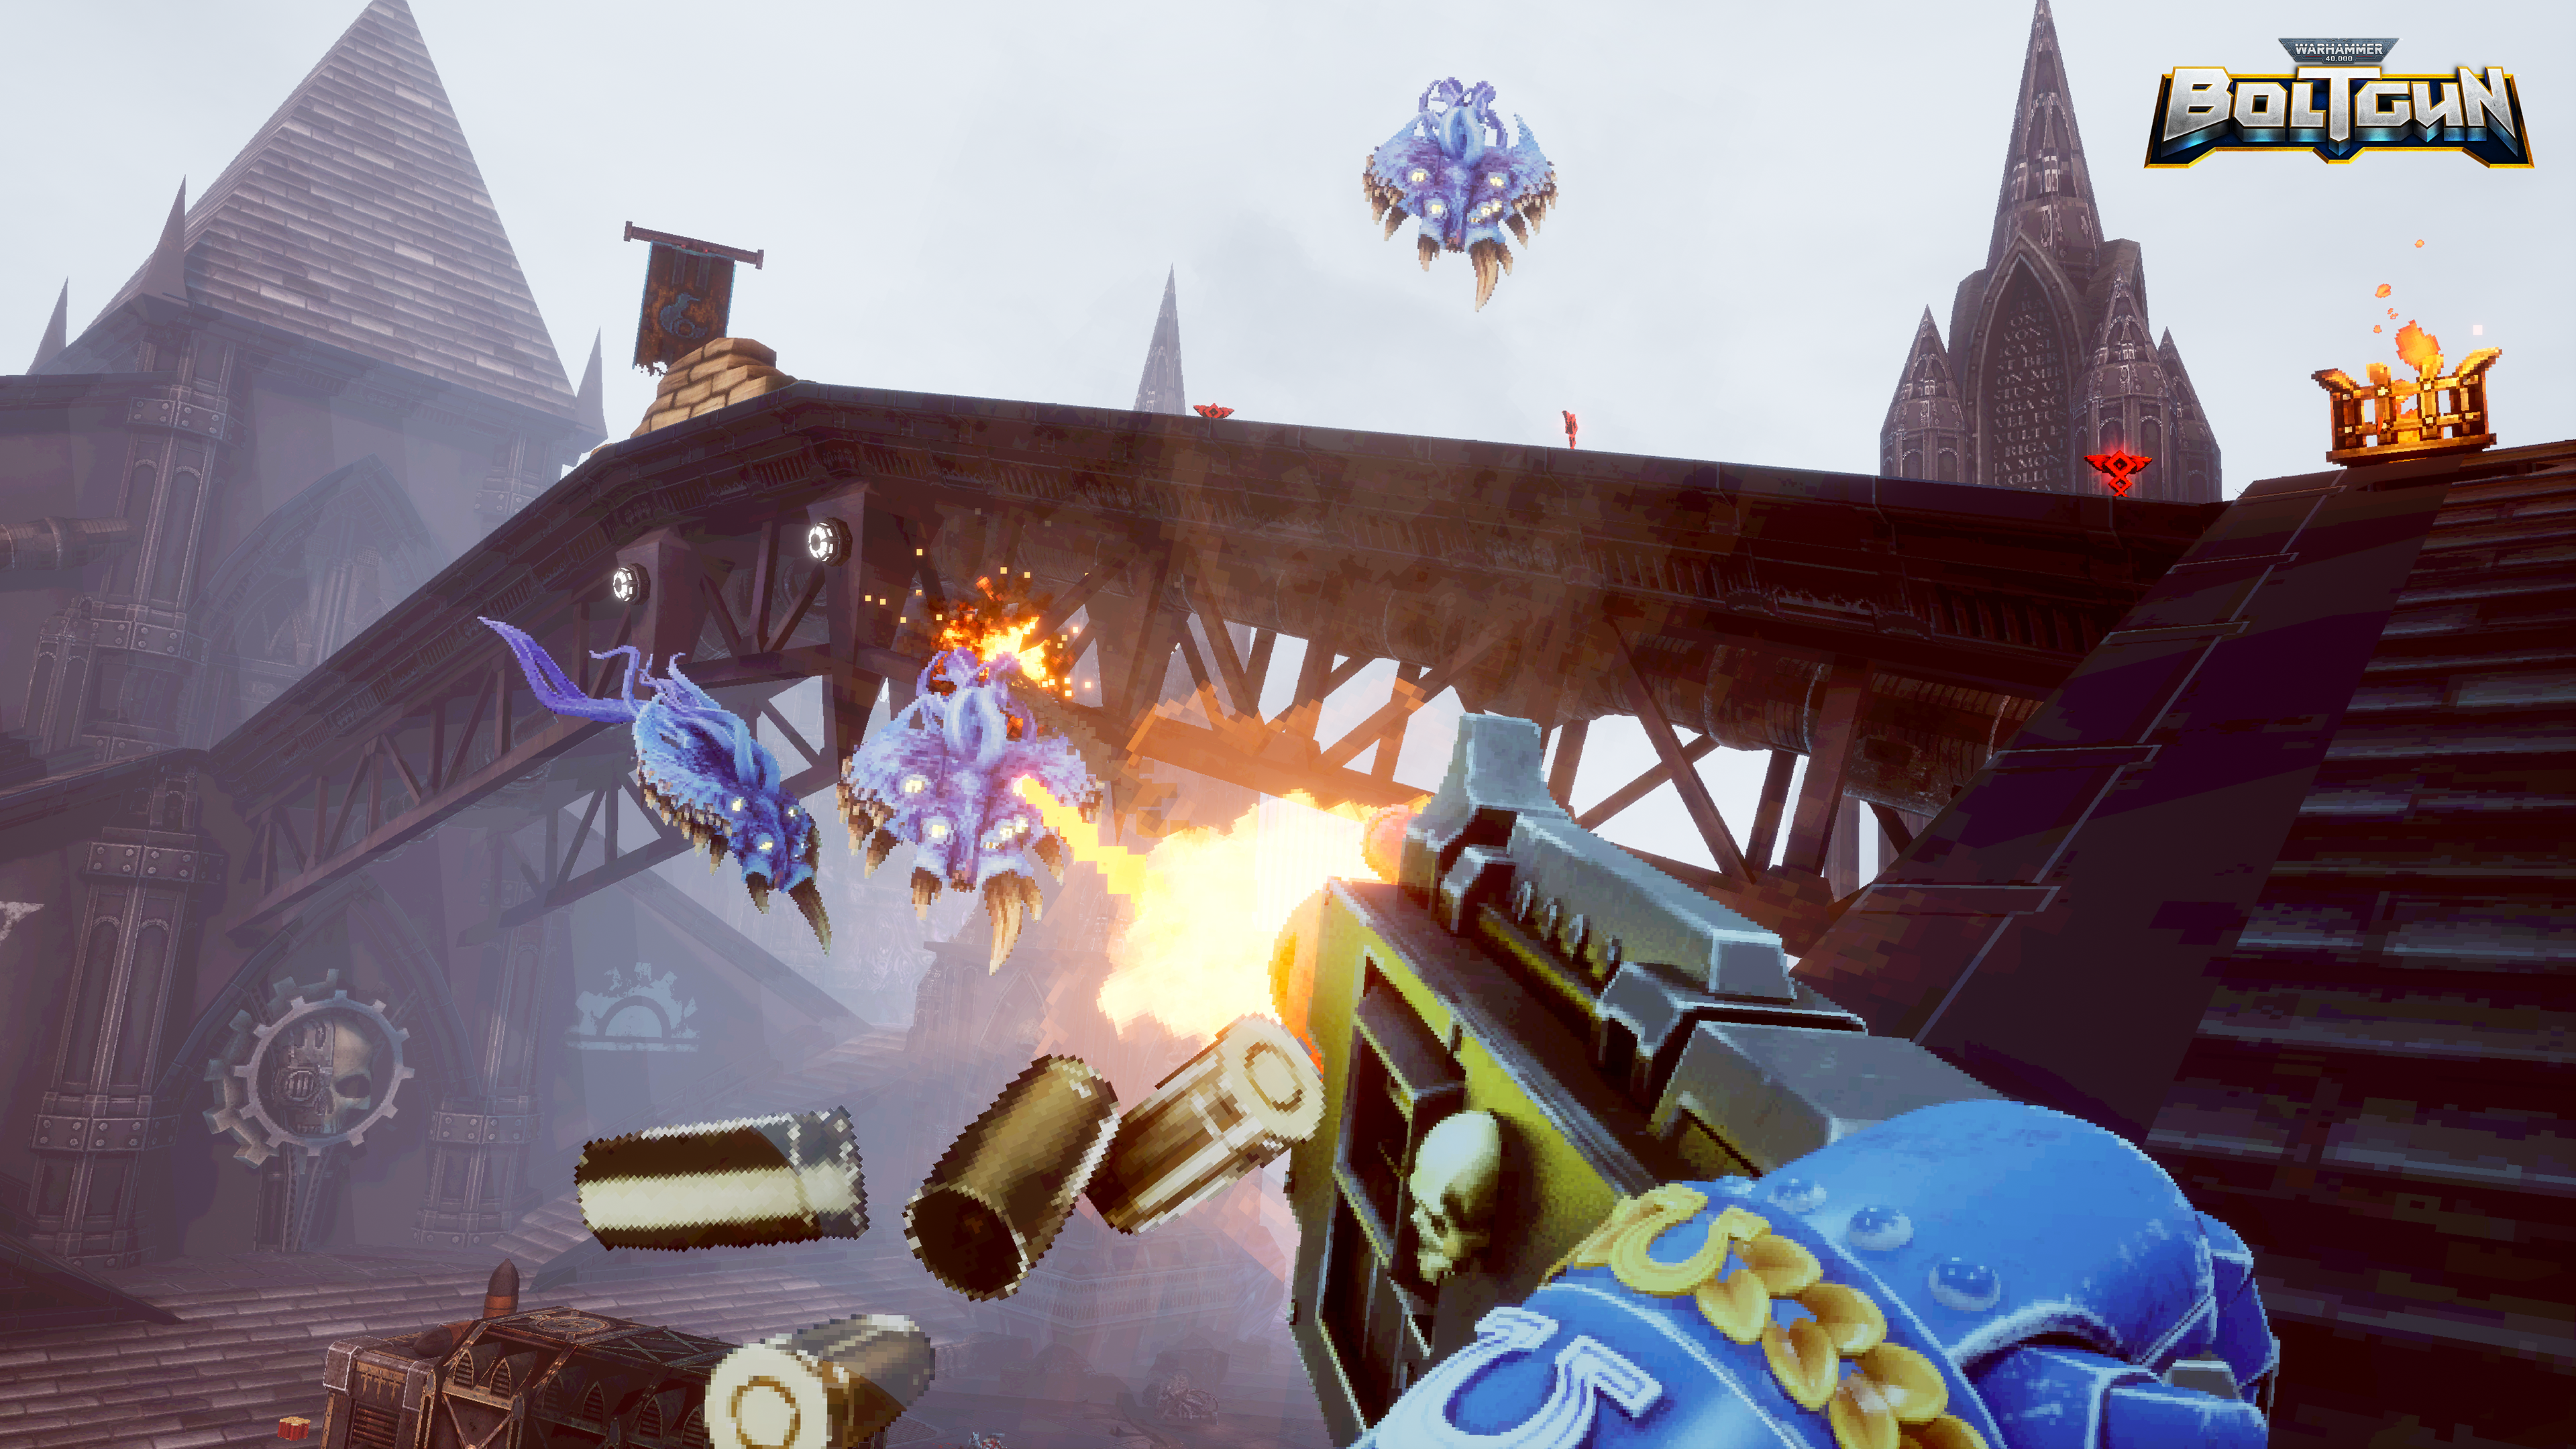 A screenshot from Warhammer 40,000: Boltgun, showing the player fighting enemies in-game.